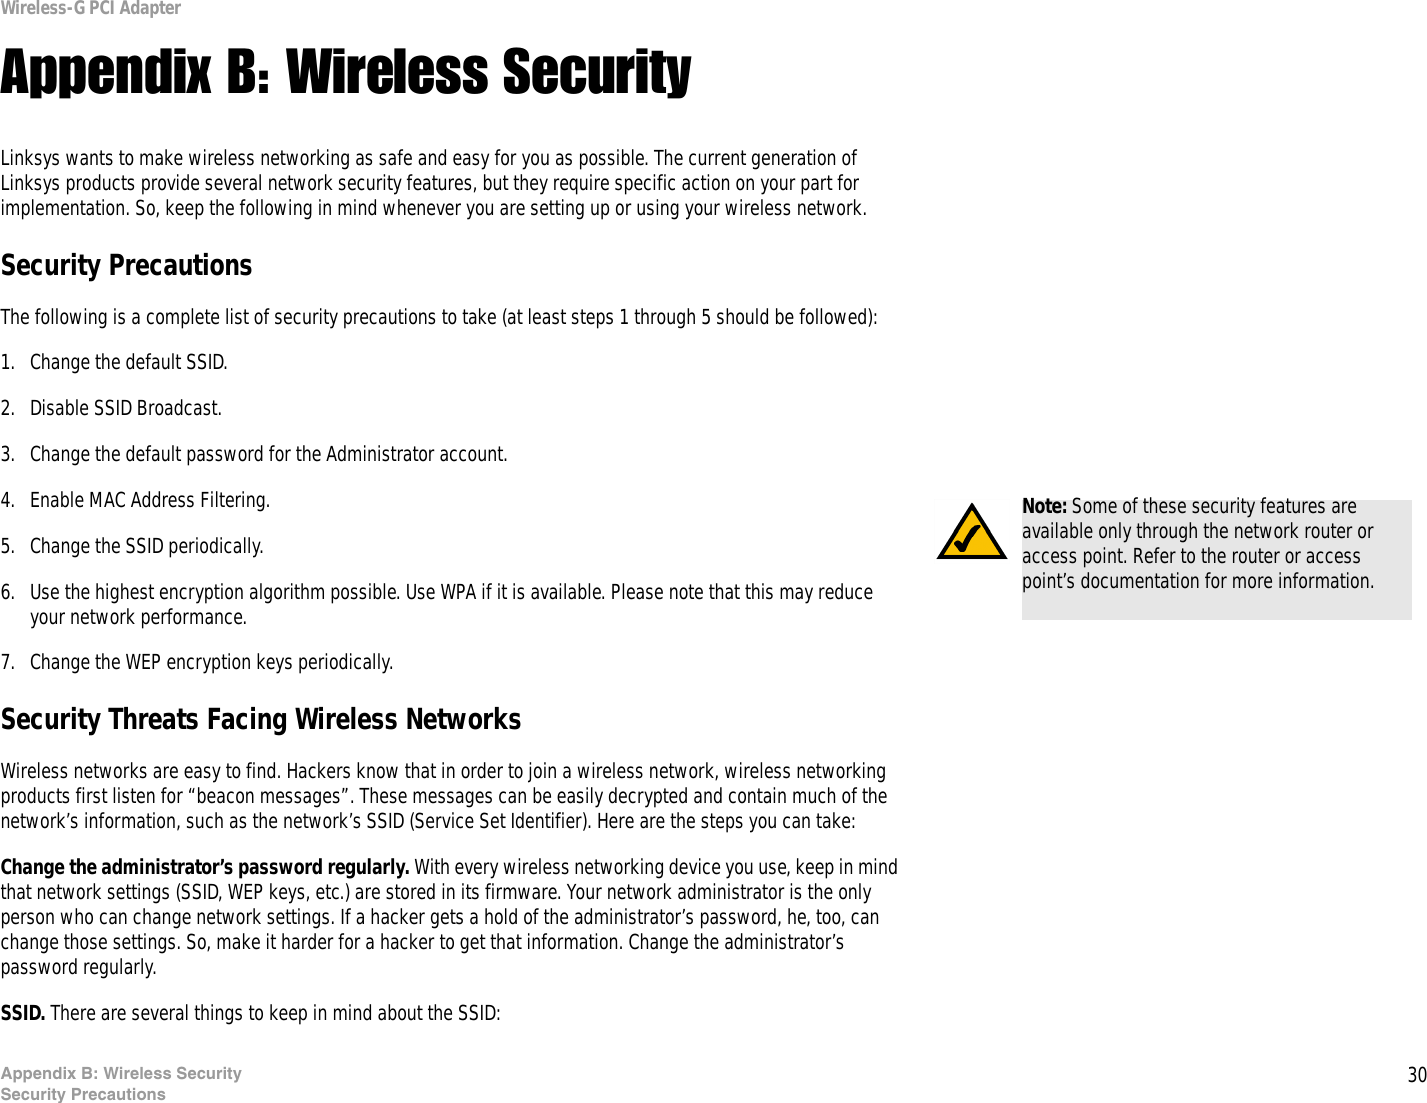 30Appendix B: Wireless SecuritySecurity PrecautionsWireless-G PCI AdapterAppendix B: Wireless SecurityLinksys wants to make wireless networking as safe and easy for you as possible. The current generation of Linksys products provide several network security features, but they require specific action on your part for implementation. So, keep the following in mind whenever you are setting up or using your wireless network.Security PrecautionsThe following is a complete list of security precautions to take (at least steps 1 through 5 should be followed):1. Change the default SSID. 2. Disable SSID Broadcast. 3. Change the default password for the Administrator account. 4. Enable MAC Address Filtering. 5. Change the SSID periodically. 6. Use the highest encryption algorithm possible. Use WPA if it is available. Please note that this may reduce your network performance. 7. Change the WEP encryption keys periodically. Security Threats Facing Wireless Networks Wireless networks are easy to find. Hackers know that in order to join a wireless network, wireless networking products first listen for “beacon messages”. These messages can be easily decrypted and contain much of the network’s information, such as the network’s SSID (Service Set Identifier). Here are the steps you can take:Change the administrator’s password regularly. With every wireless networking device you use, keep in mind that network settings (SSID, WEP keys, etc.) are stored in its firmware. Your network administrator is the only person who can change network settings. If a hacker gets a hold of the administrator’s password, he, too, can change those settings. So, make it harder for a hacker to get that information. Change the administrator’s password regularly.SSID. There are several things to keep in mind about the SSID: Note: Some of these security features are available only through the network router or access point. Refer to the router or access point’s documentation for more information.